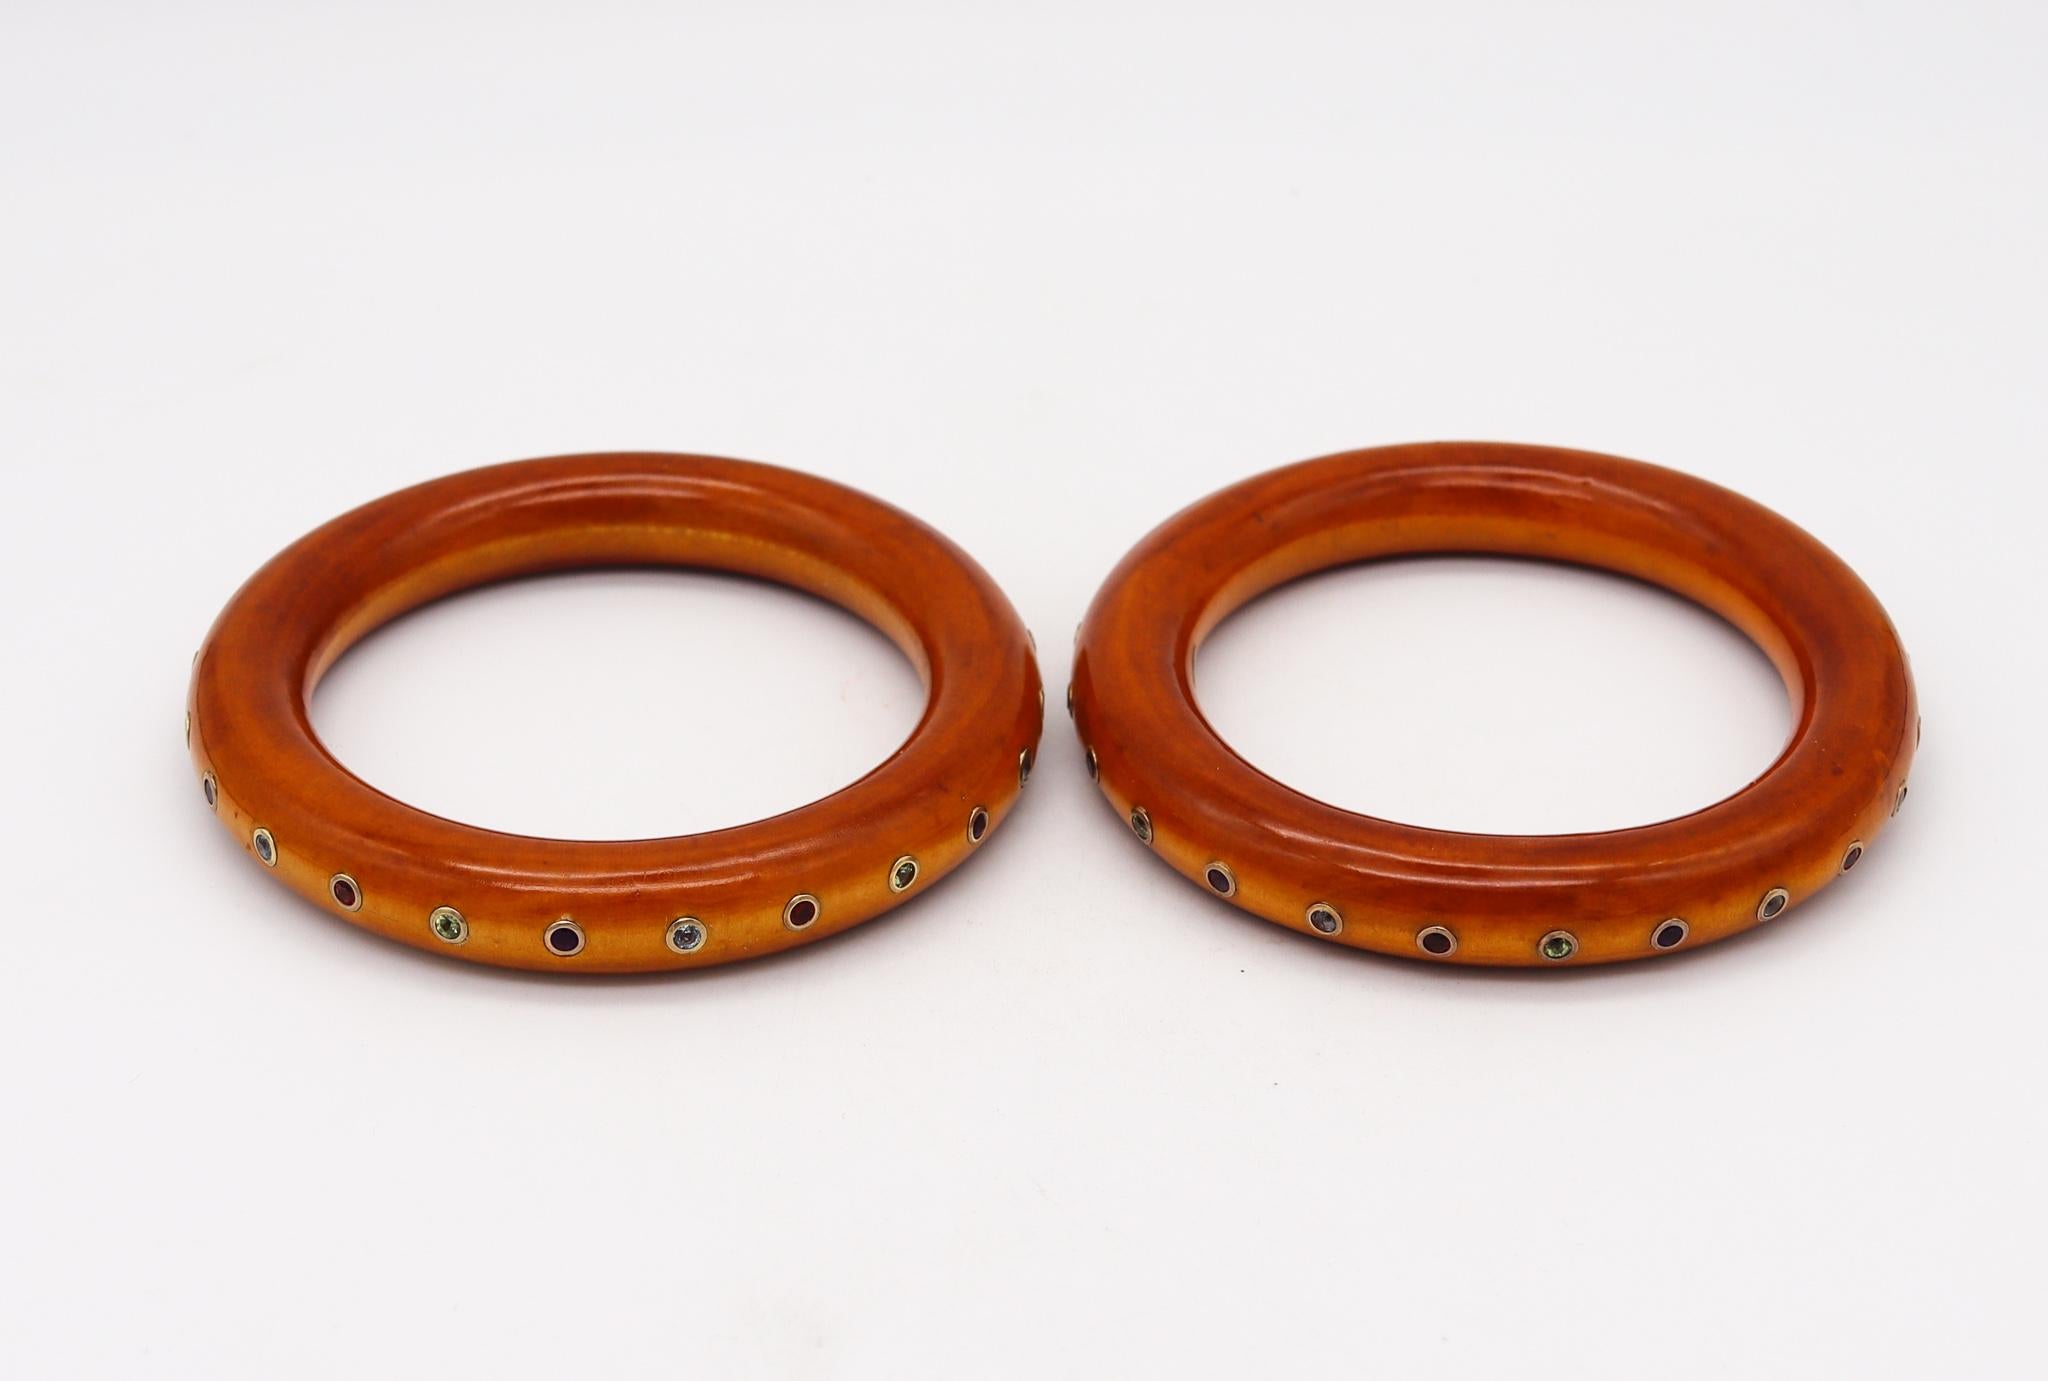 Suite of lacquered burl wood bangles.

Very handsome and elegant pair of Italian bangles carved from natural light brown burl wood with lacquer finish. Inlaid in the wood with multiples round bezels mounted with natural gemstones of different